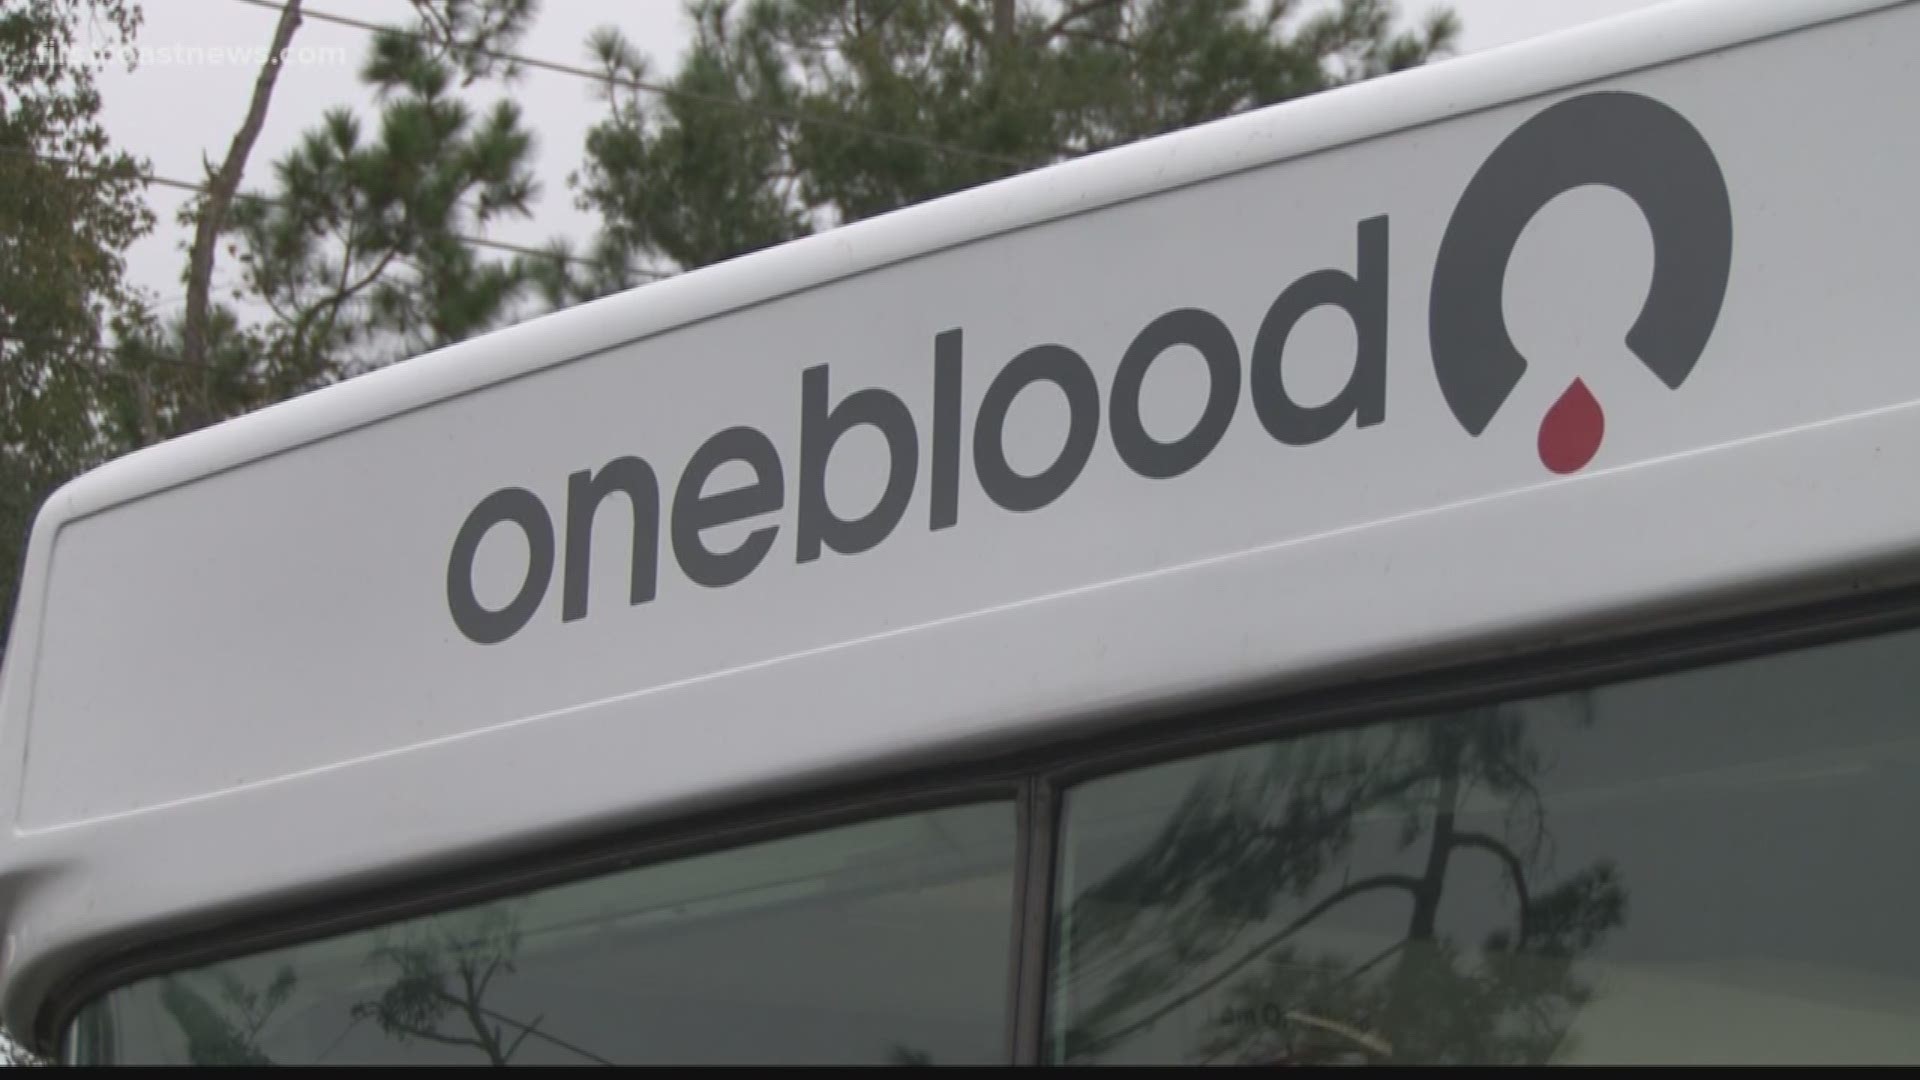 To try and get more people to donate, OneBlood is offering gift cards, blankets, or even movie passes in order to get people to come in.